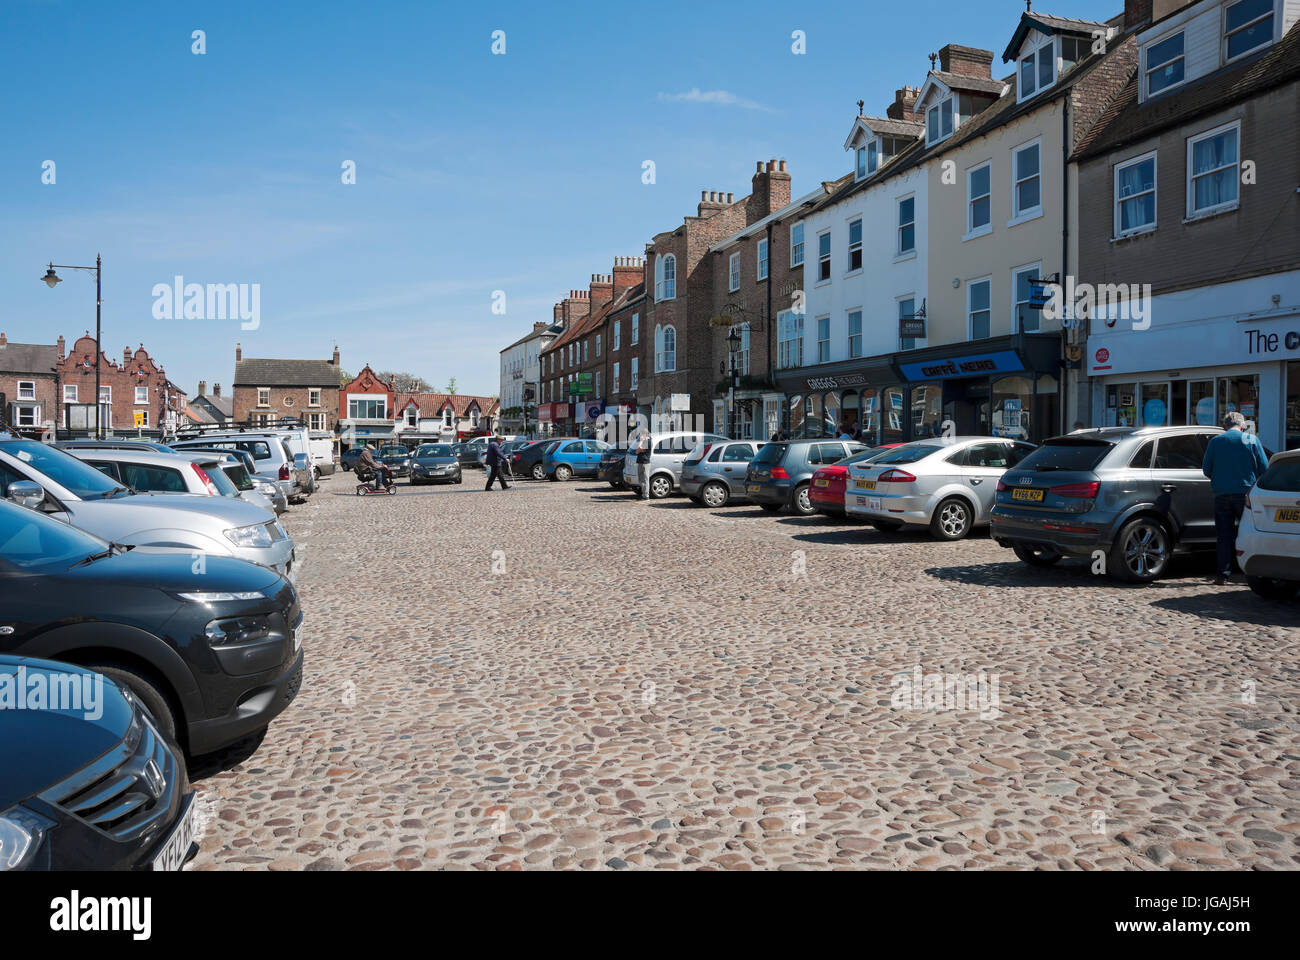 Cars parked in the town centre in spring Thirsk North Yorkshire England UK United Kingdom GB Great Britain Stock Photo